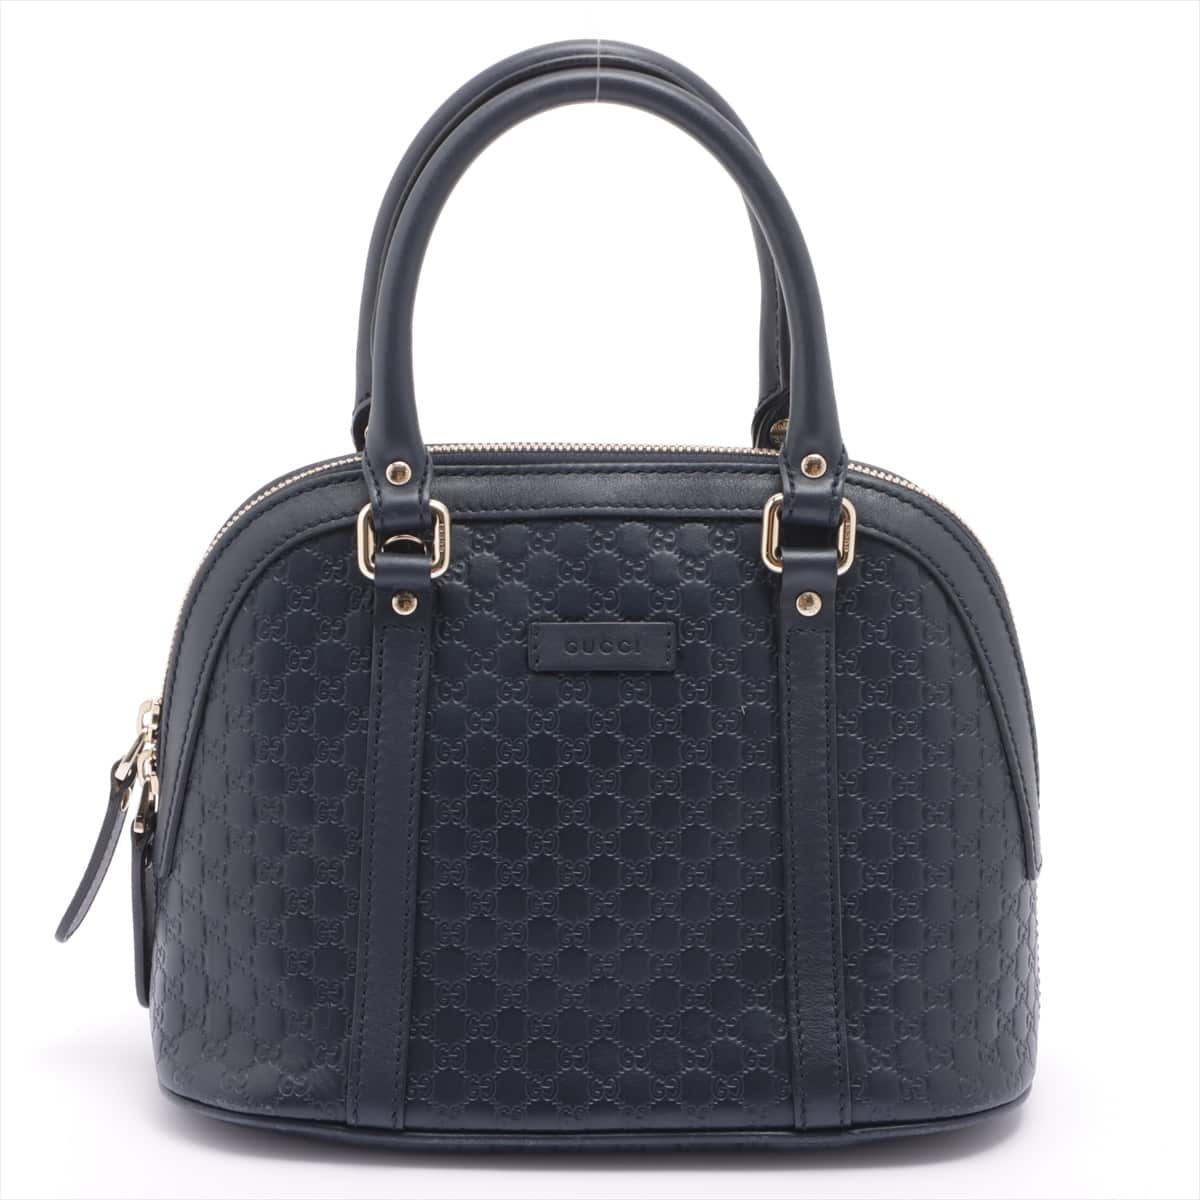 Gucci Micro Guccissima Leather 2way shoulder bag Navy blue 449654